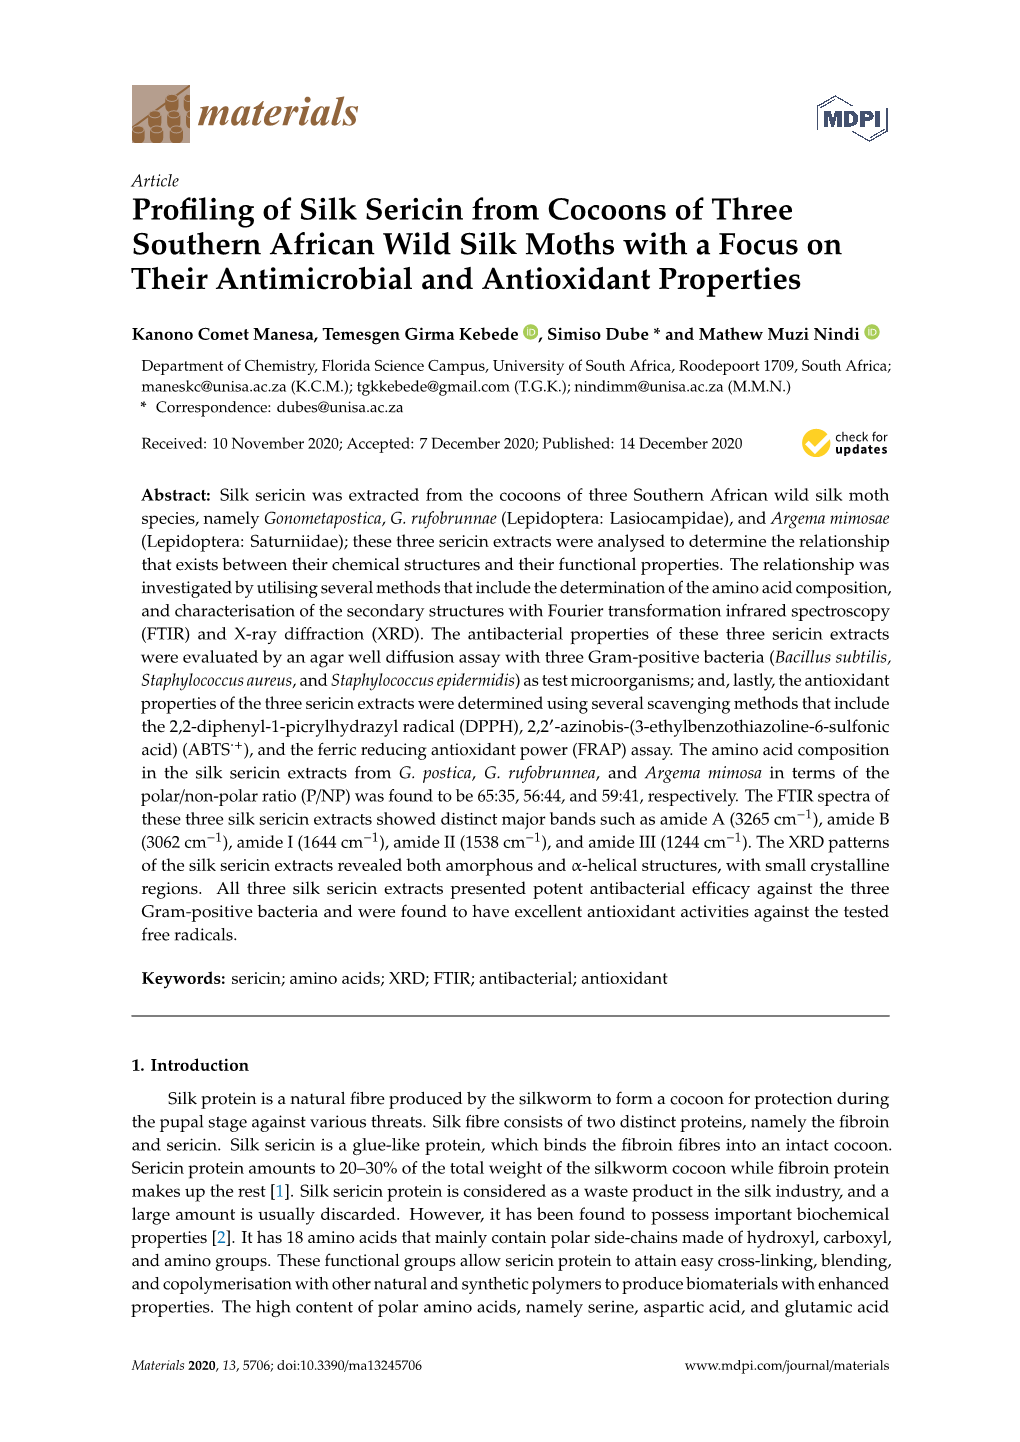 Profiling of Silk Sericin from Cocoons of Three Southern African Wild Silk